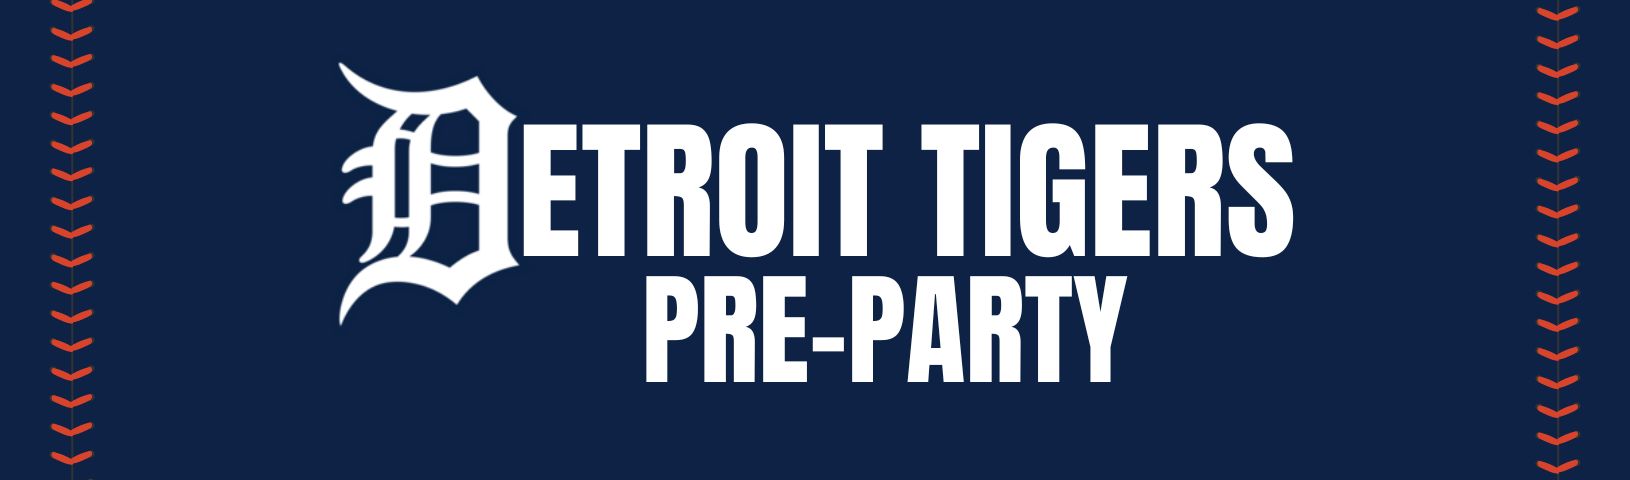 DETROIT TIGERS PARTY Background Image